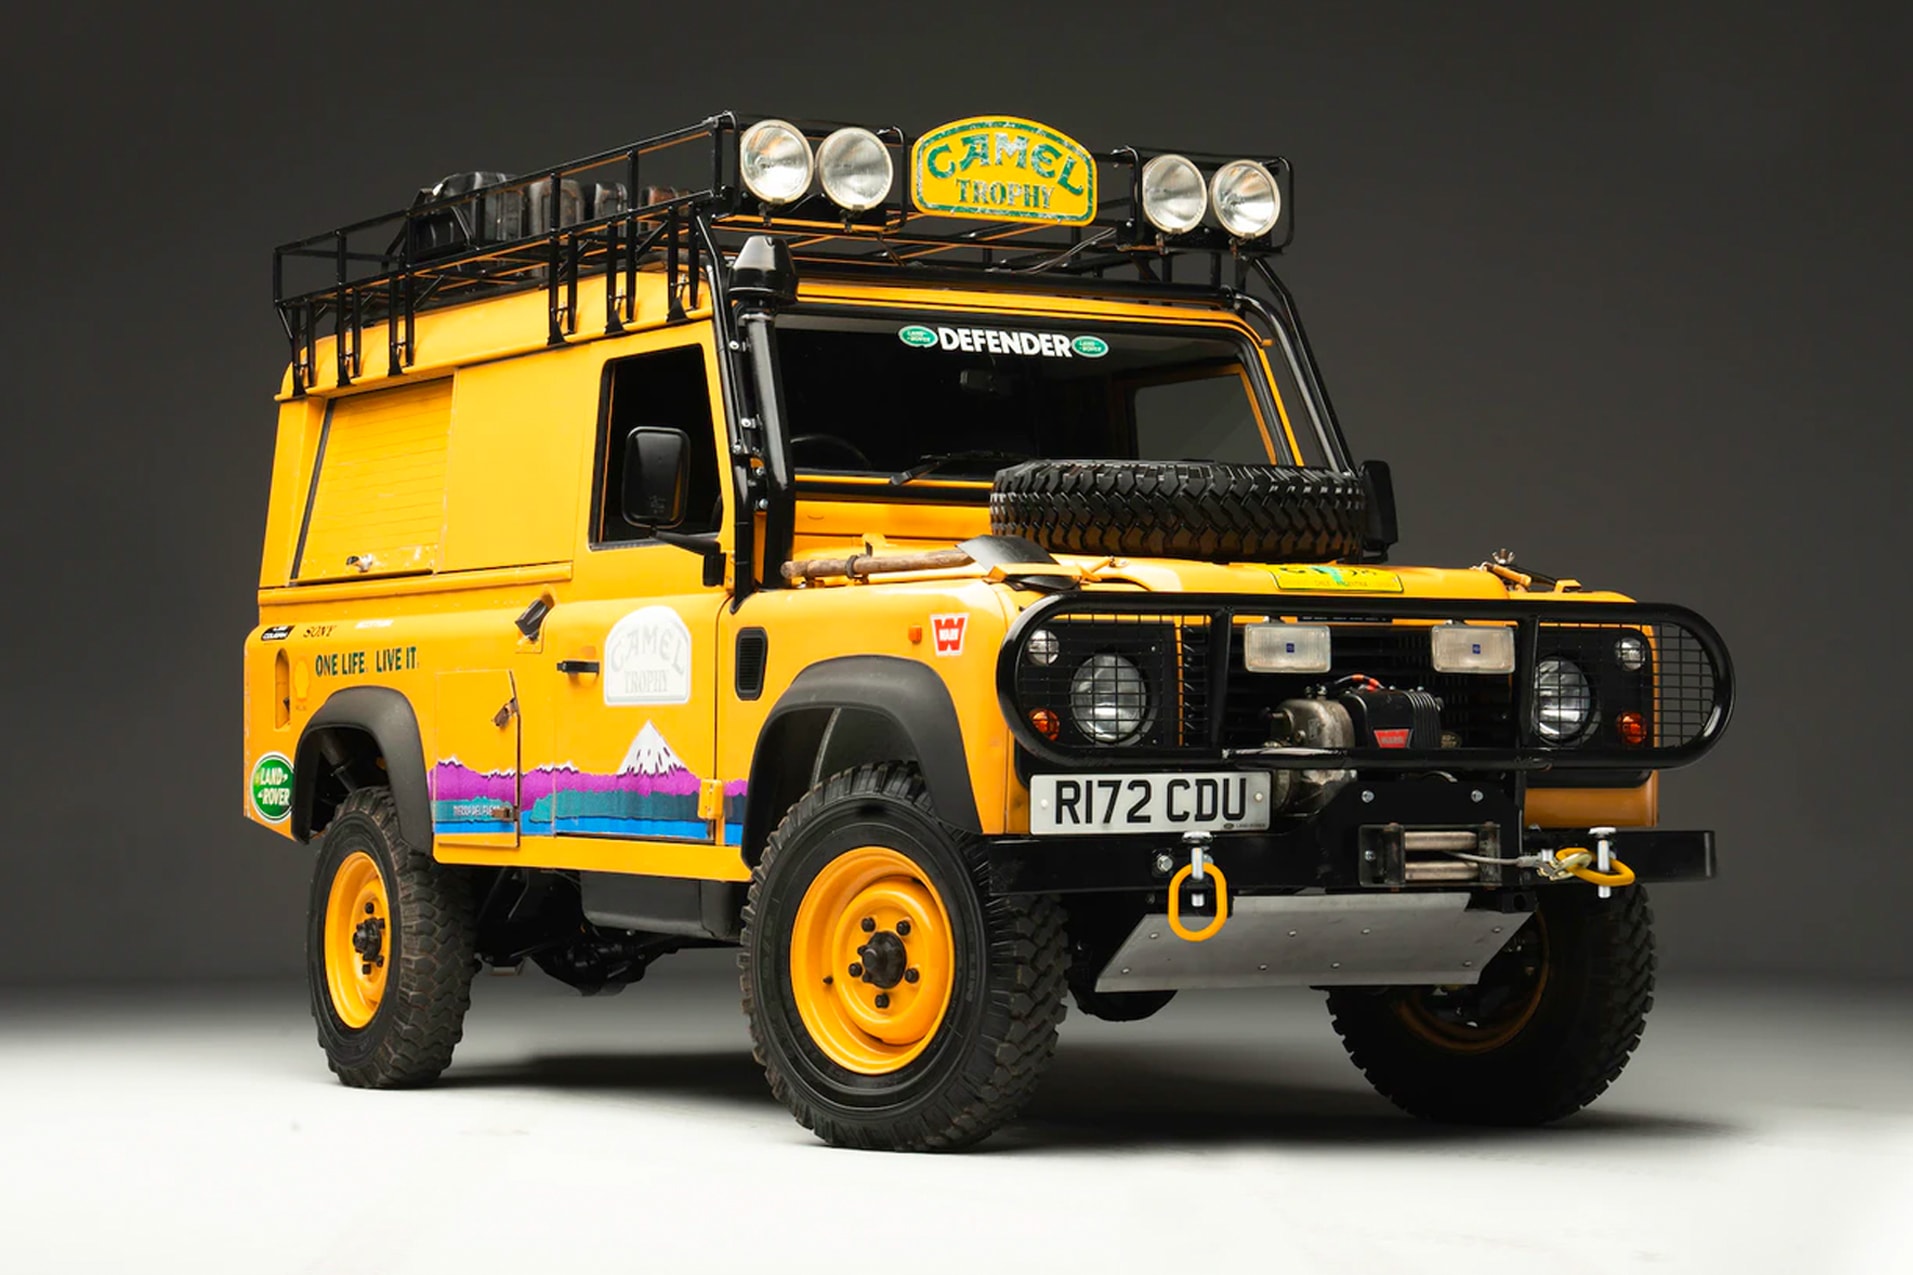 collecting cars 1998 LAND ROVER DEFENDER 110 CAMEL TROPHY auction off-roading auctions uk 4x4 cars vintage classic suvs 